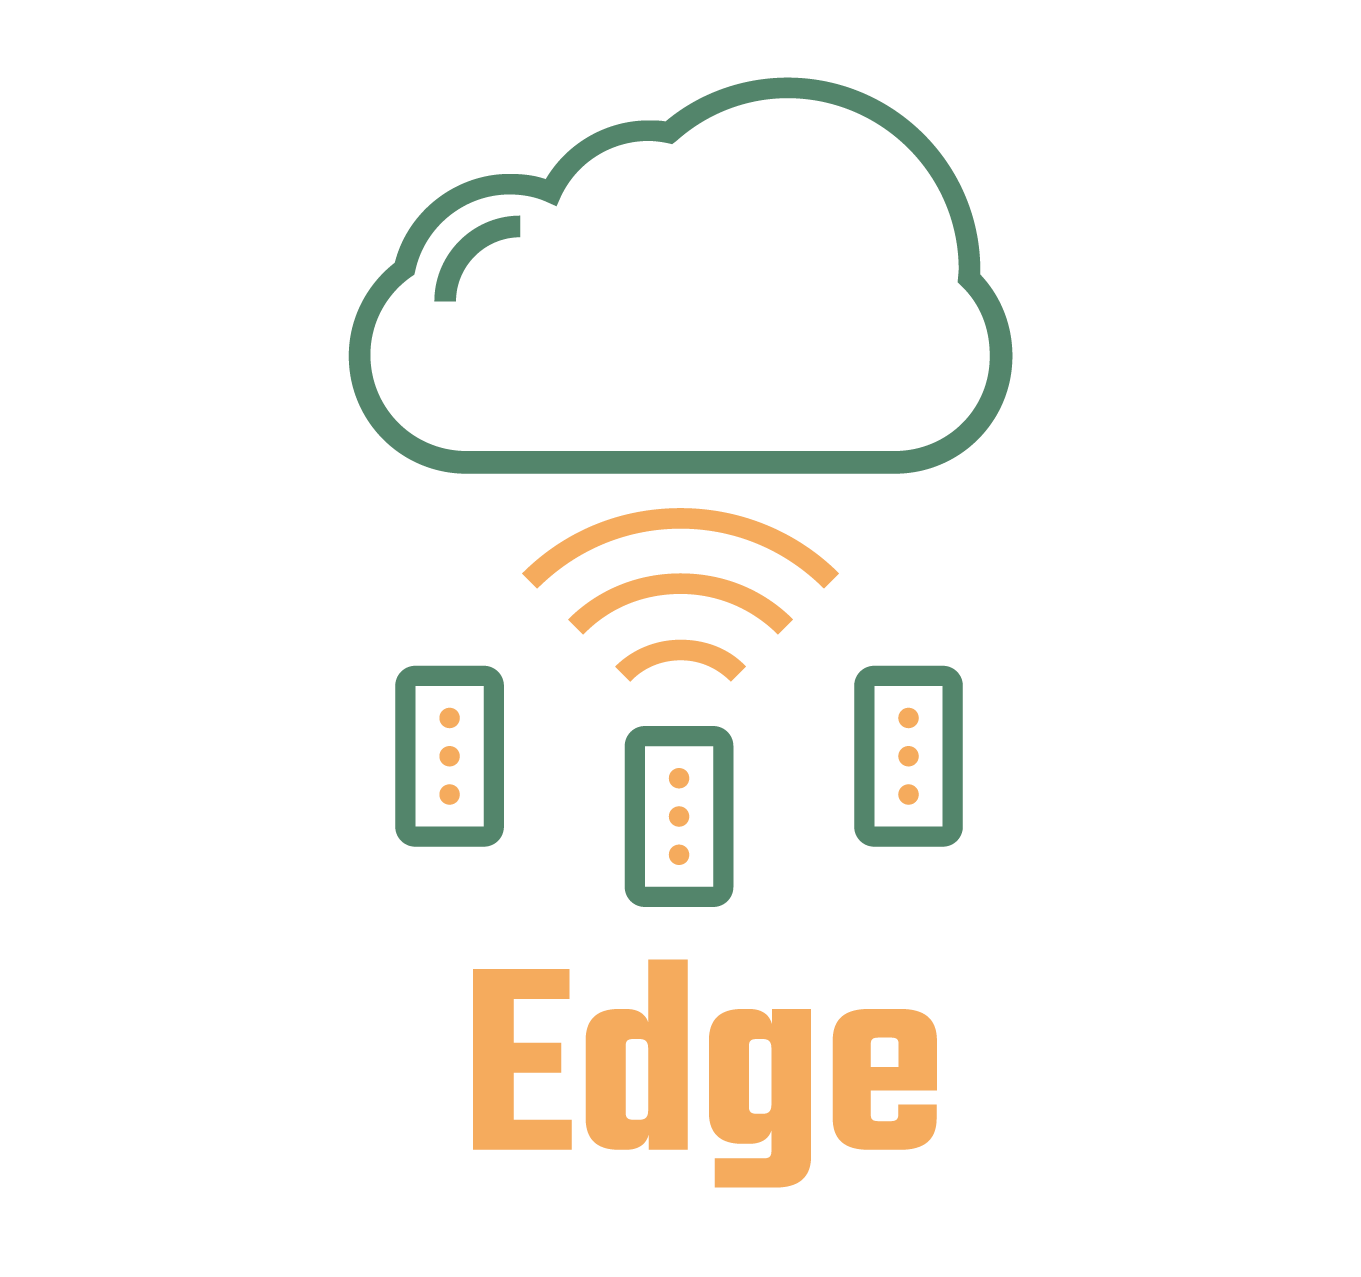 What is Edge?